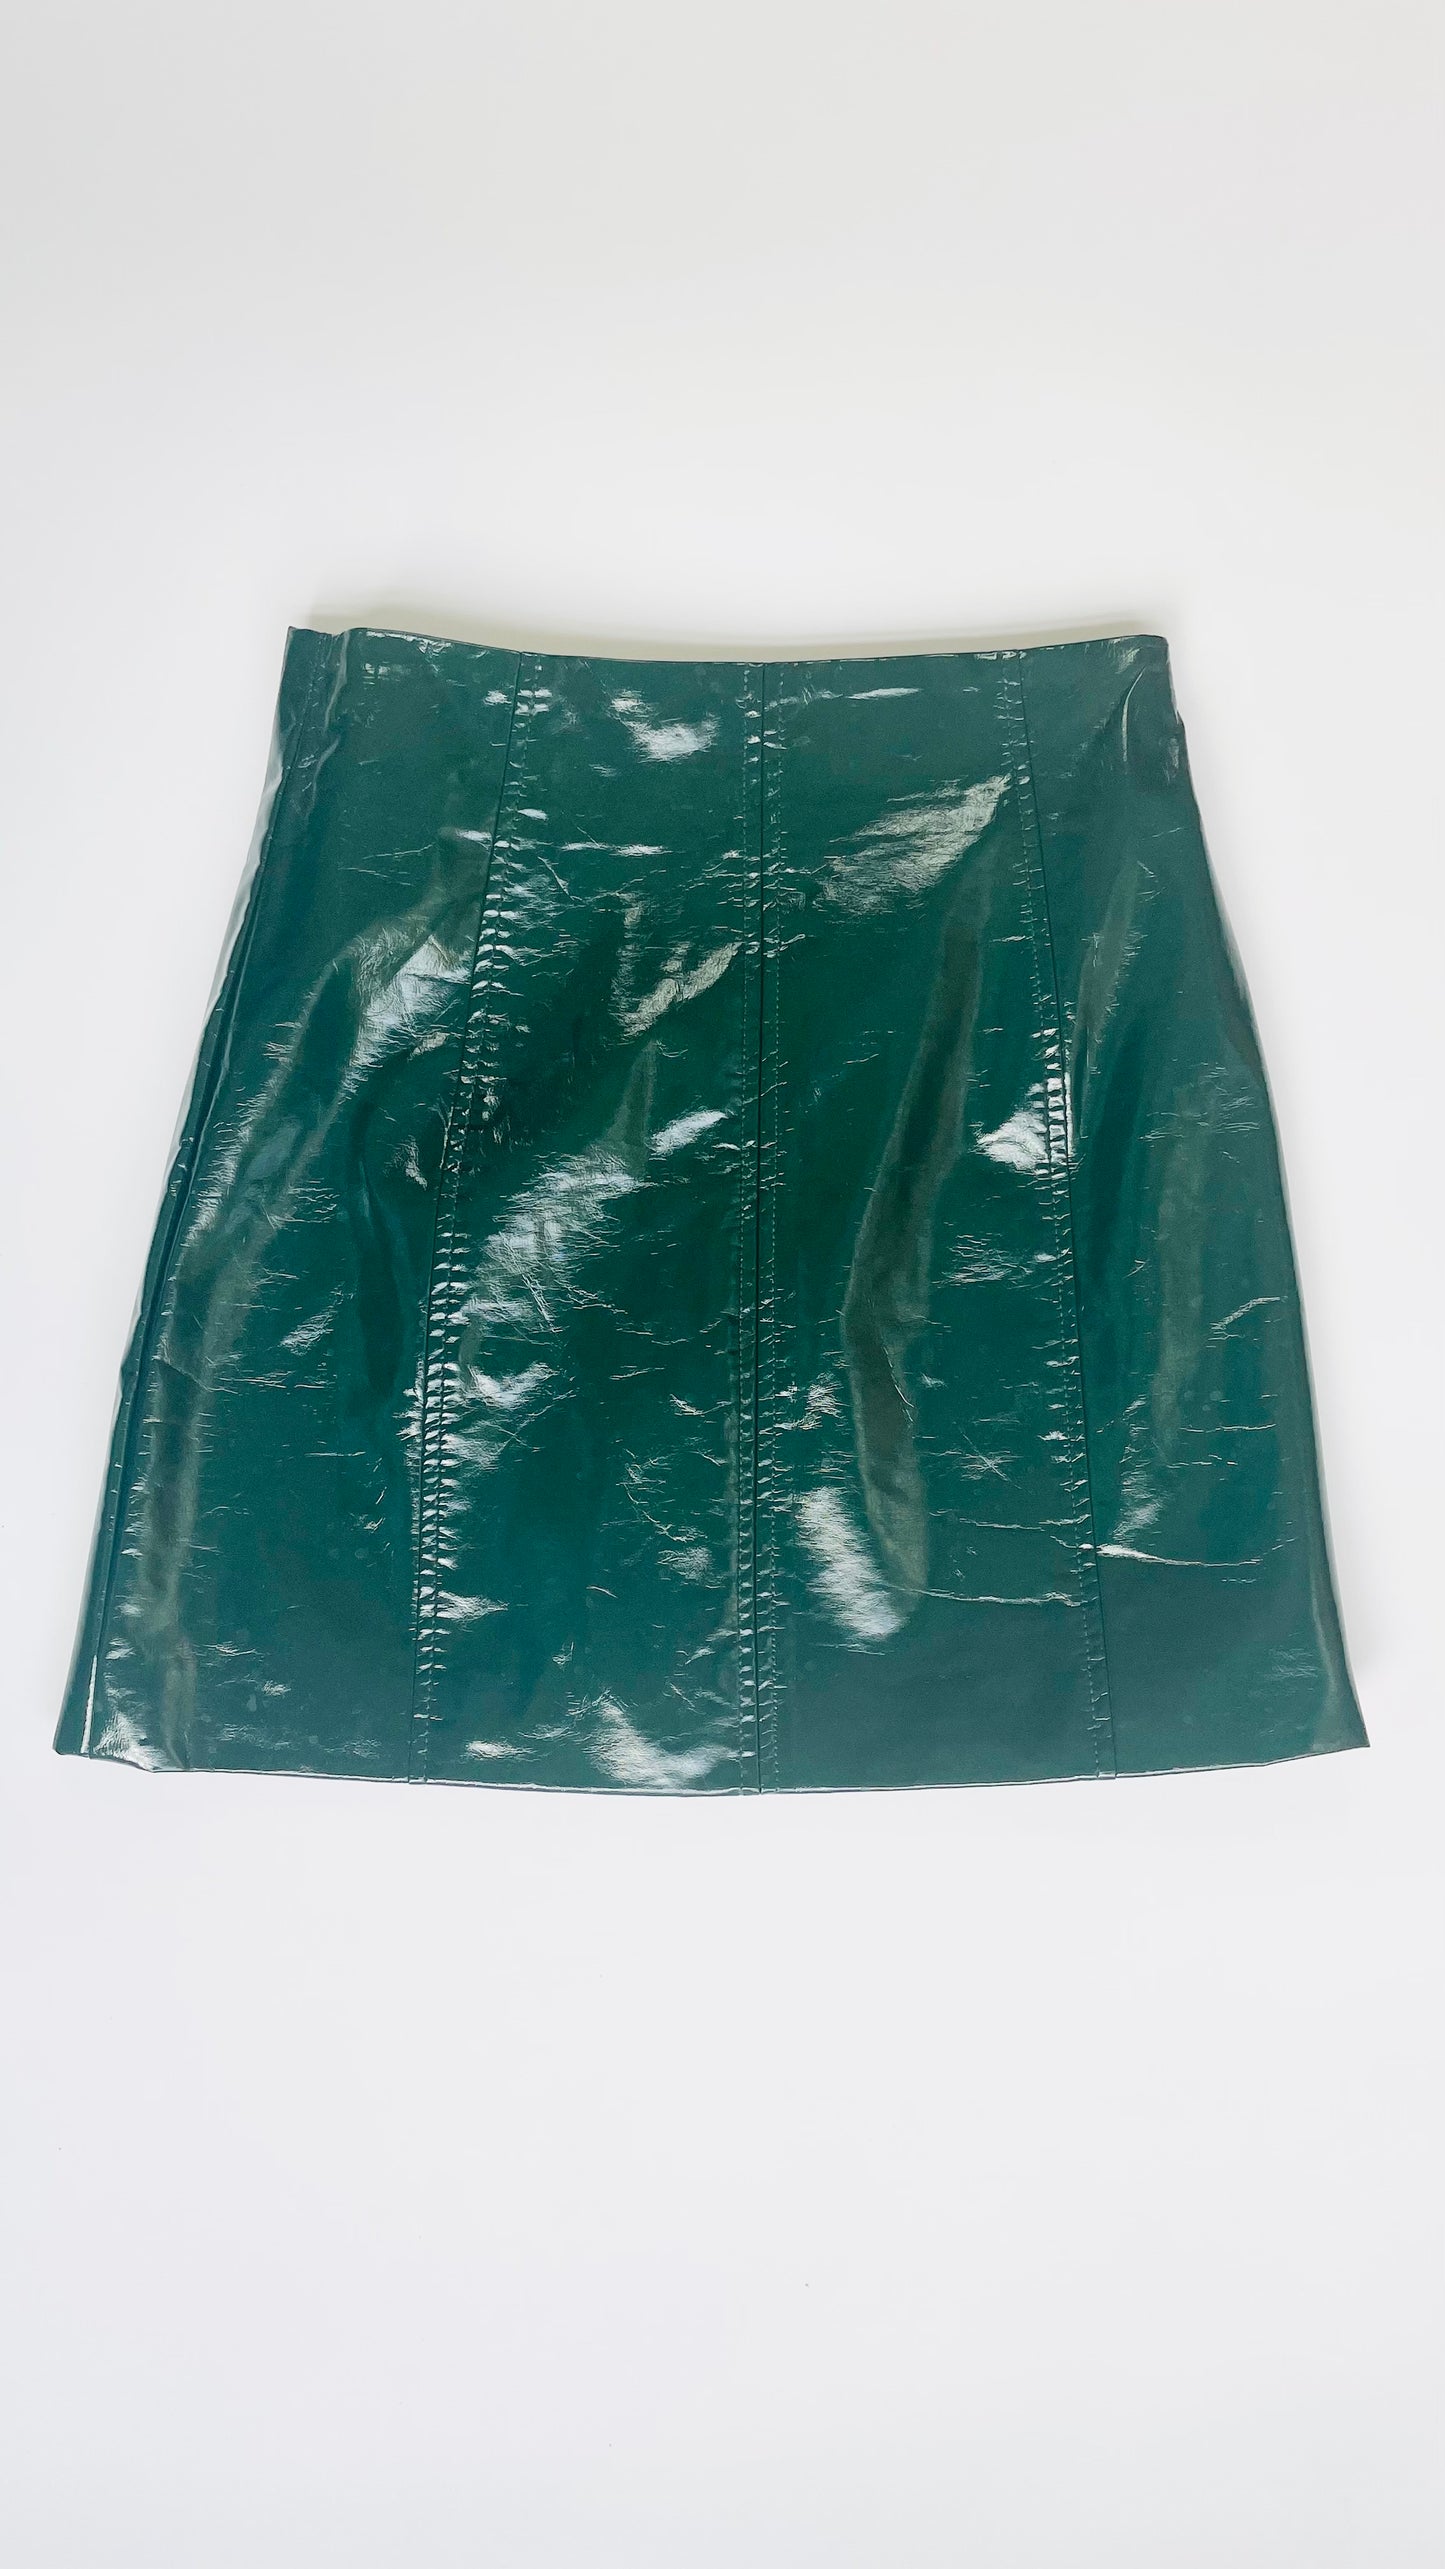 Pre-Loved green patent mini skirt - Size M